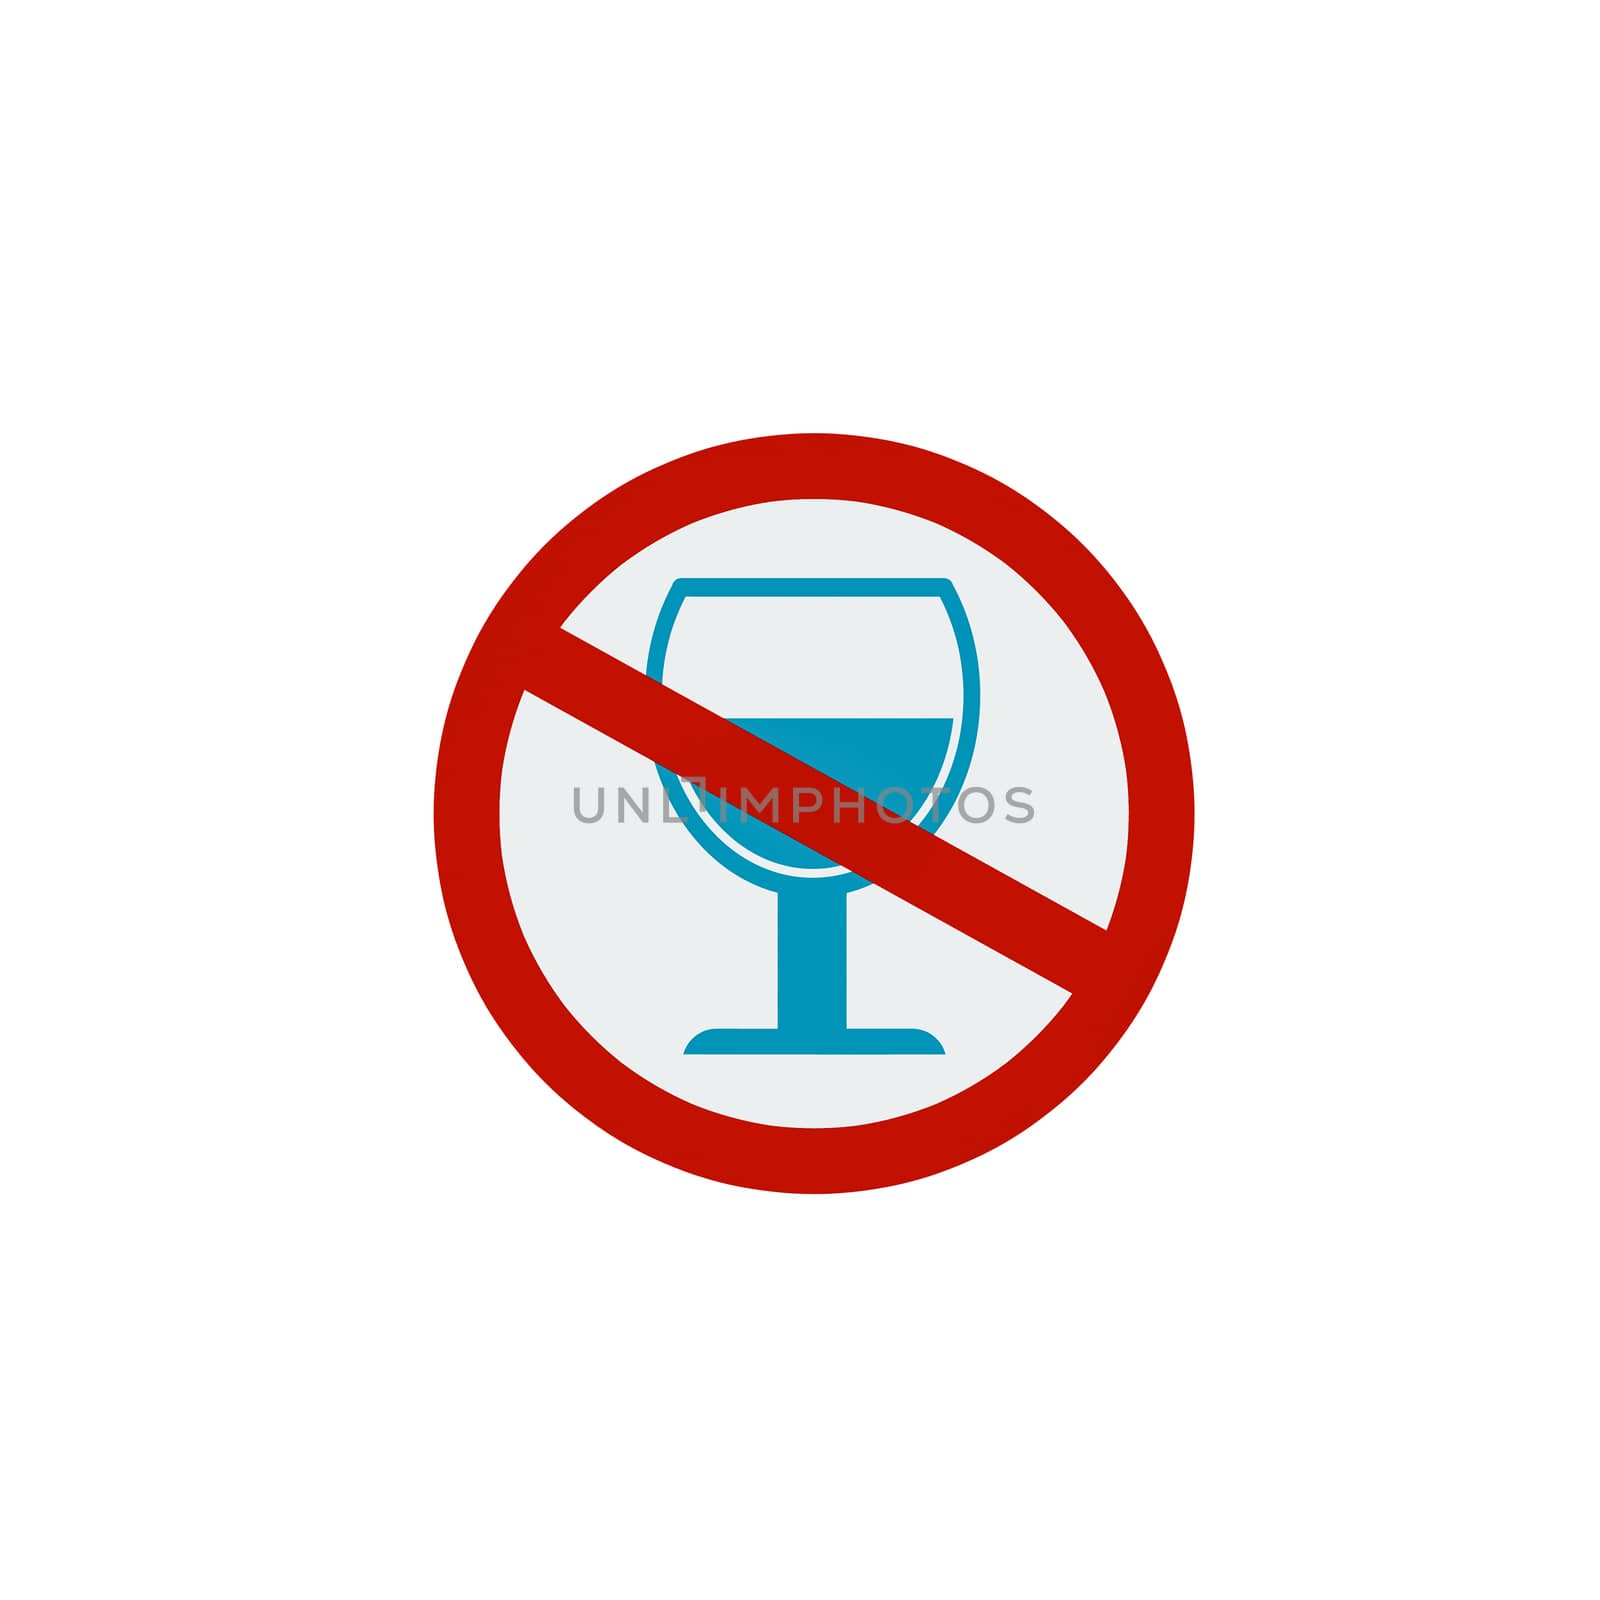 No alcohol drinks icon on white background.Prohibits, Drunk not to drive. by praditlohhana